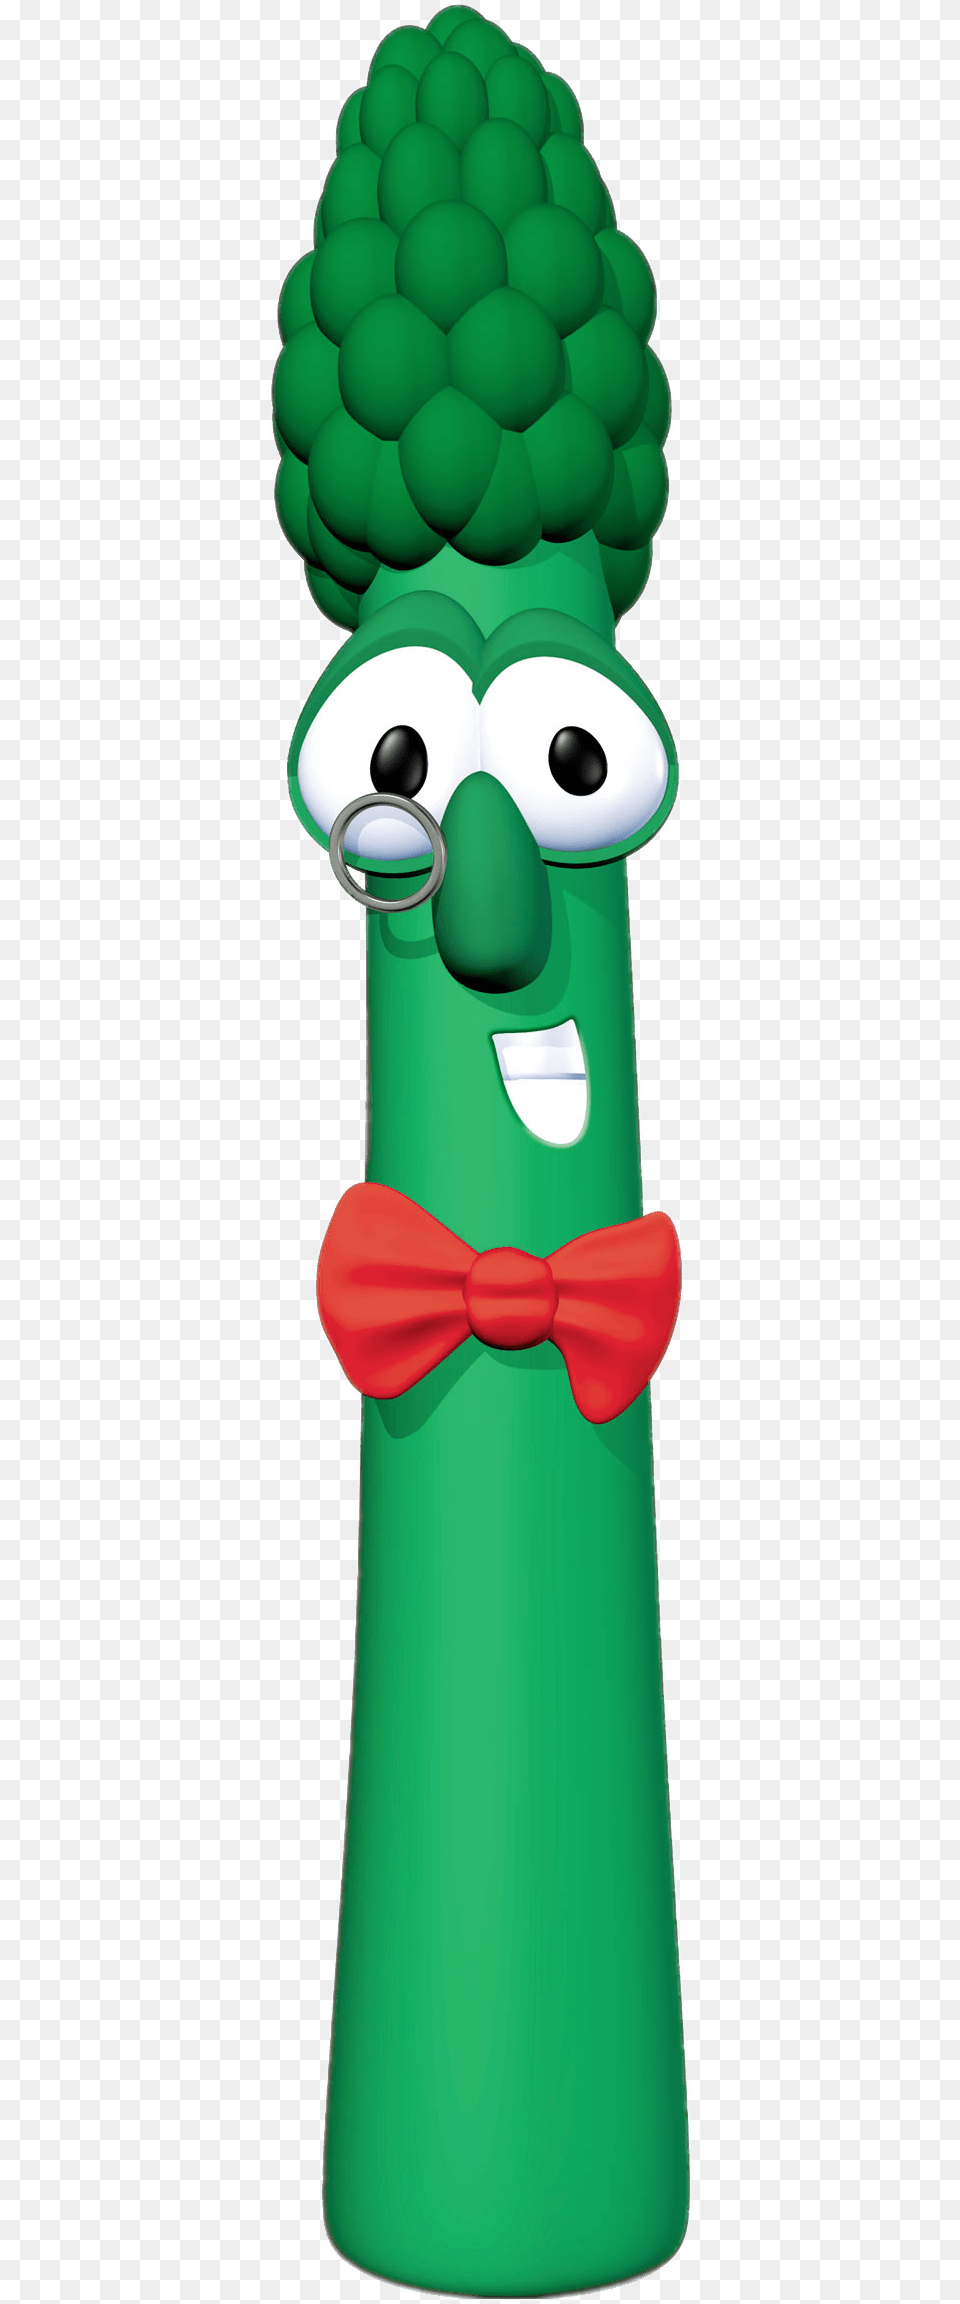 Archibald Asparagus With Red Bow Tie Archibald Asparagus, Dynamite, Weapon Png